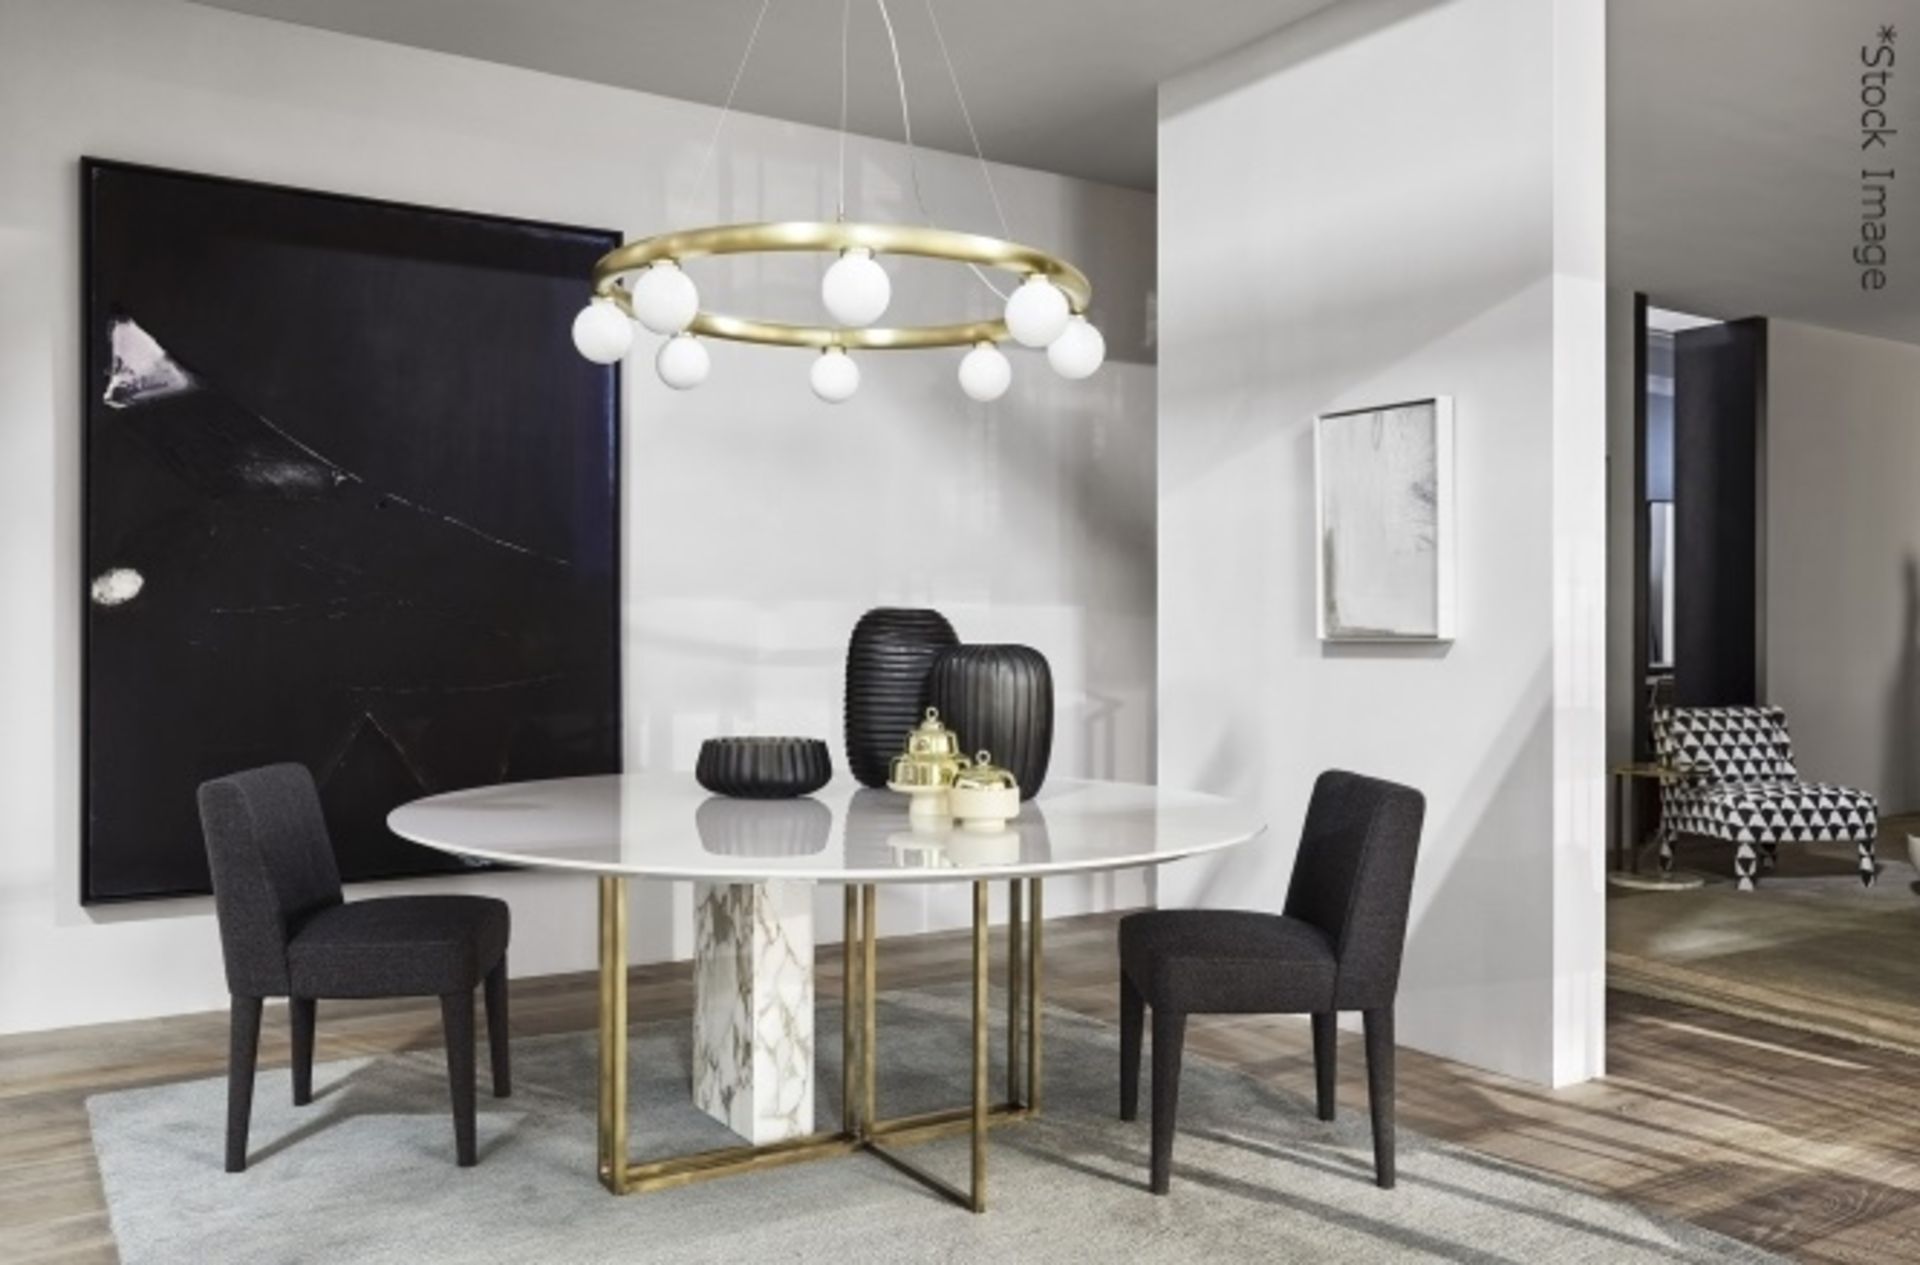 1 x Huge Luxury Statement Circular 8-Light Chandelier In Brass With Opal Shades - Price £3,540 - Image 6 of 10